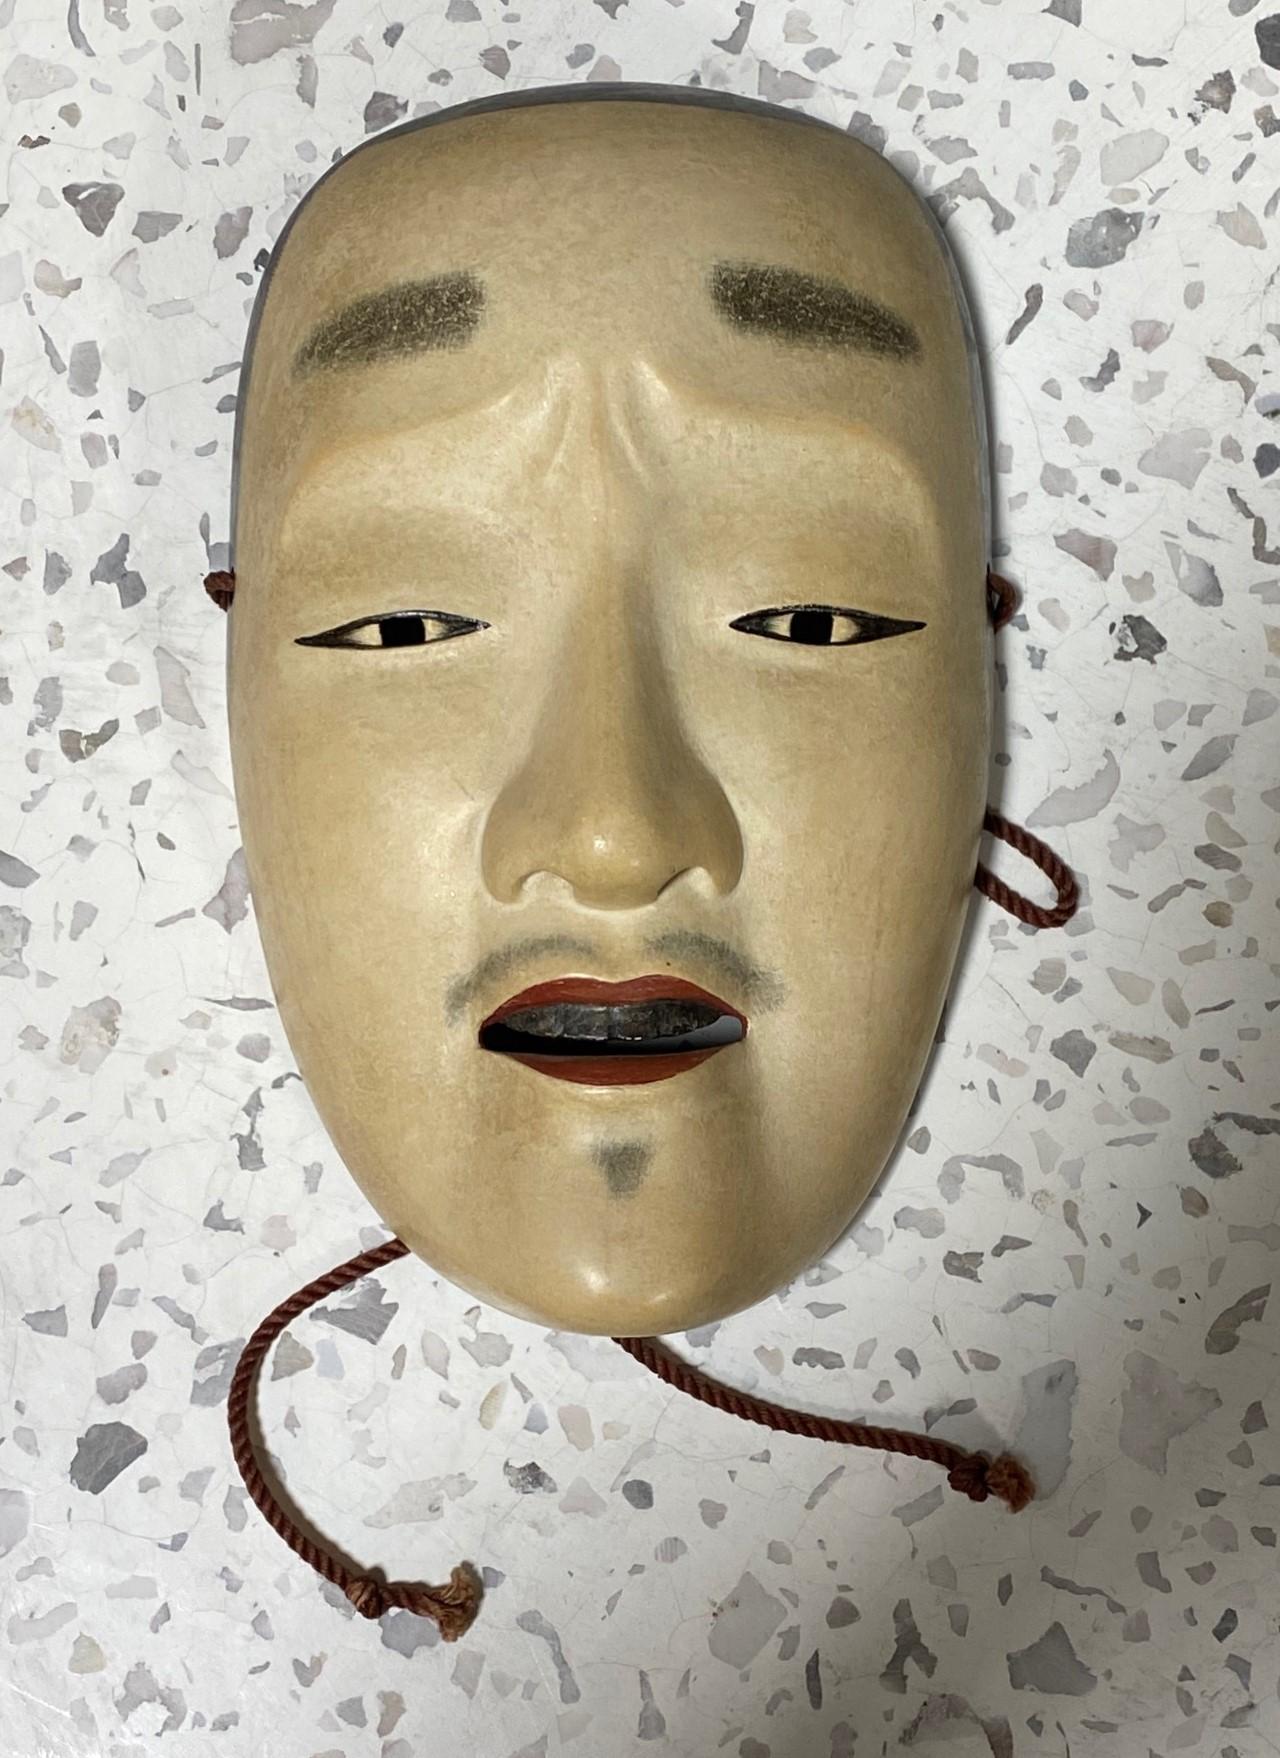 A beautiful, wonderfully crafted, alluring mask made for Japanese Noh theatre.

The mask is handcrafted and hand-carved from natural wood and is signed by the maker, clearly a master of his trade, on the verso.

This mask is of the Noh theatre